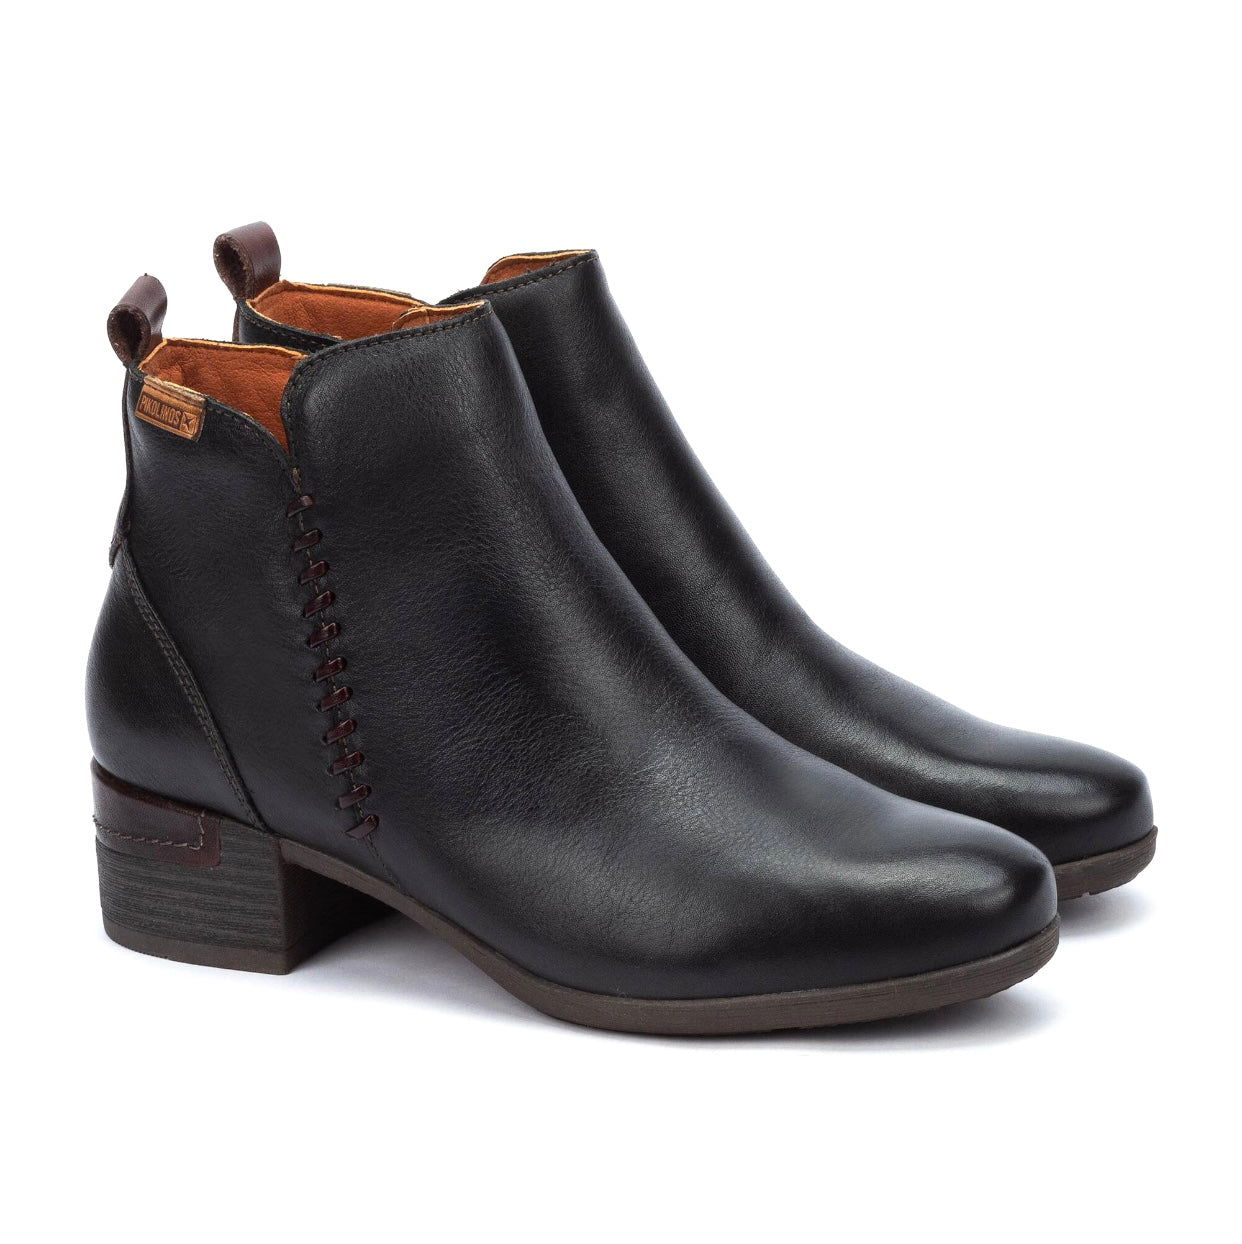 Pikolinos Malaga W6W-8950 Black Zip Ankle Boots Made In Spain